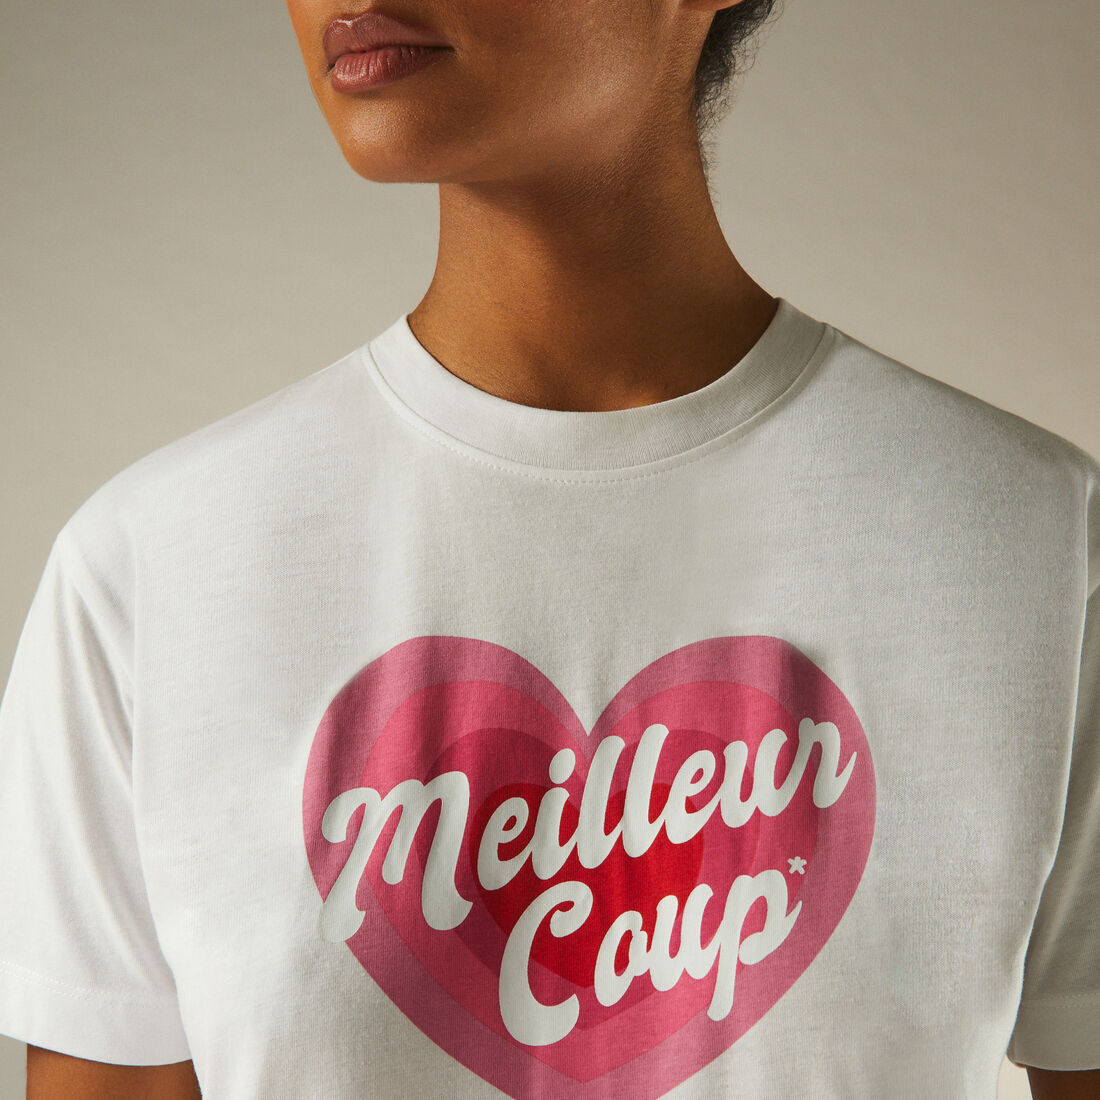 t-shirt with "Meilleur coup" print;